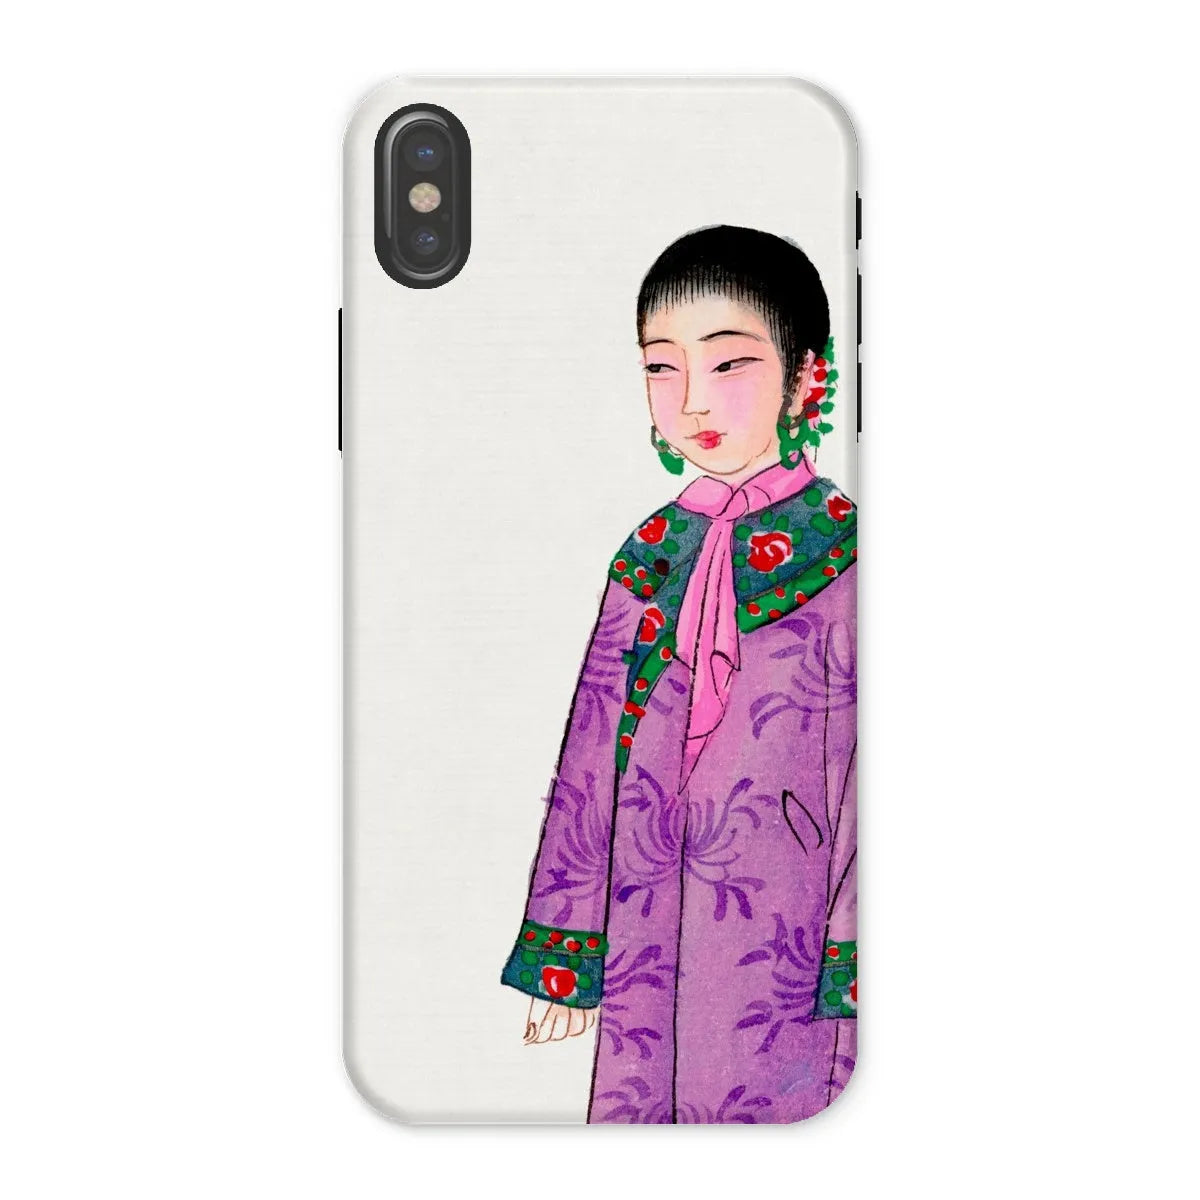 Manchu Noblewoman - Chinese Aesthetic Art Phone Case - Iphone x / Matte - Mobile Phone Cases - Aesthetic Art